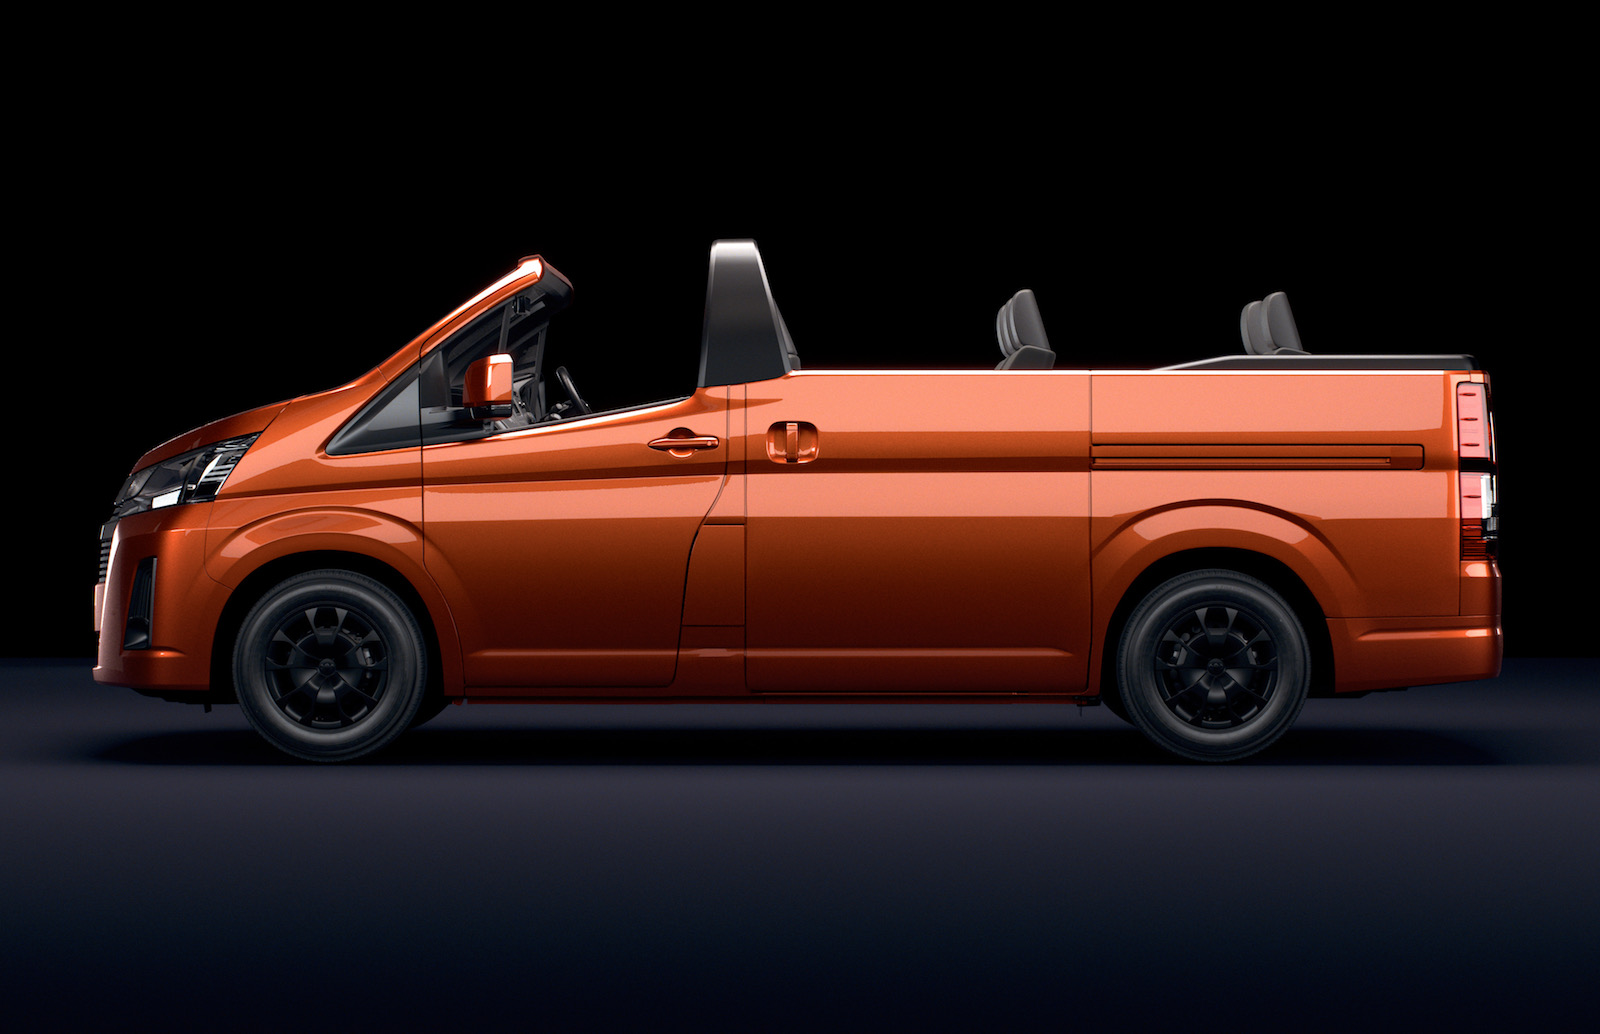 Toyota HiAce Convertible is a joke, but very cool